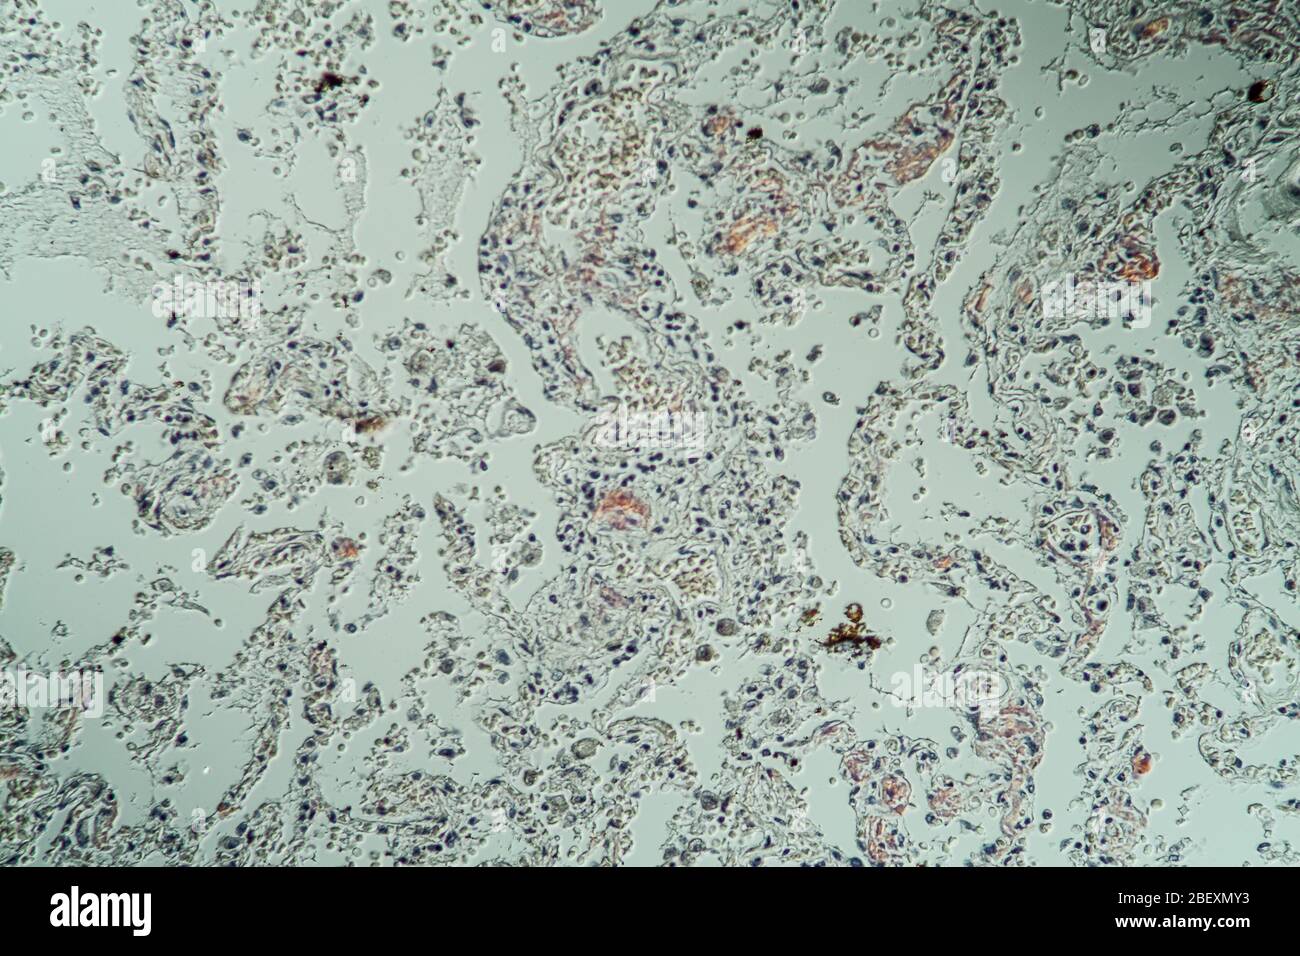 Lungs with amyloid deposits of sick tissue under the microscope 200x ...